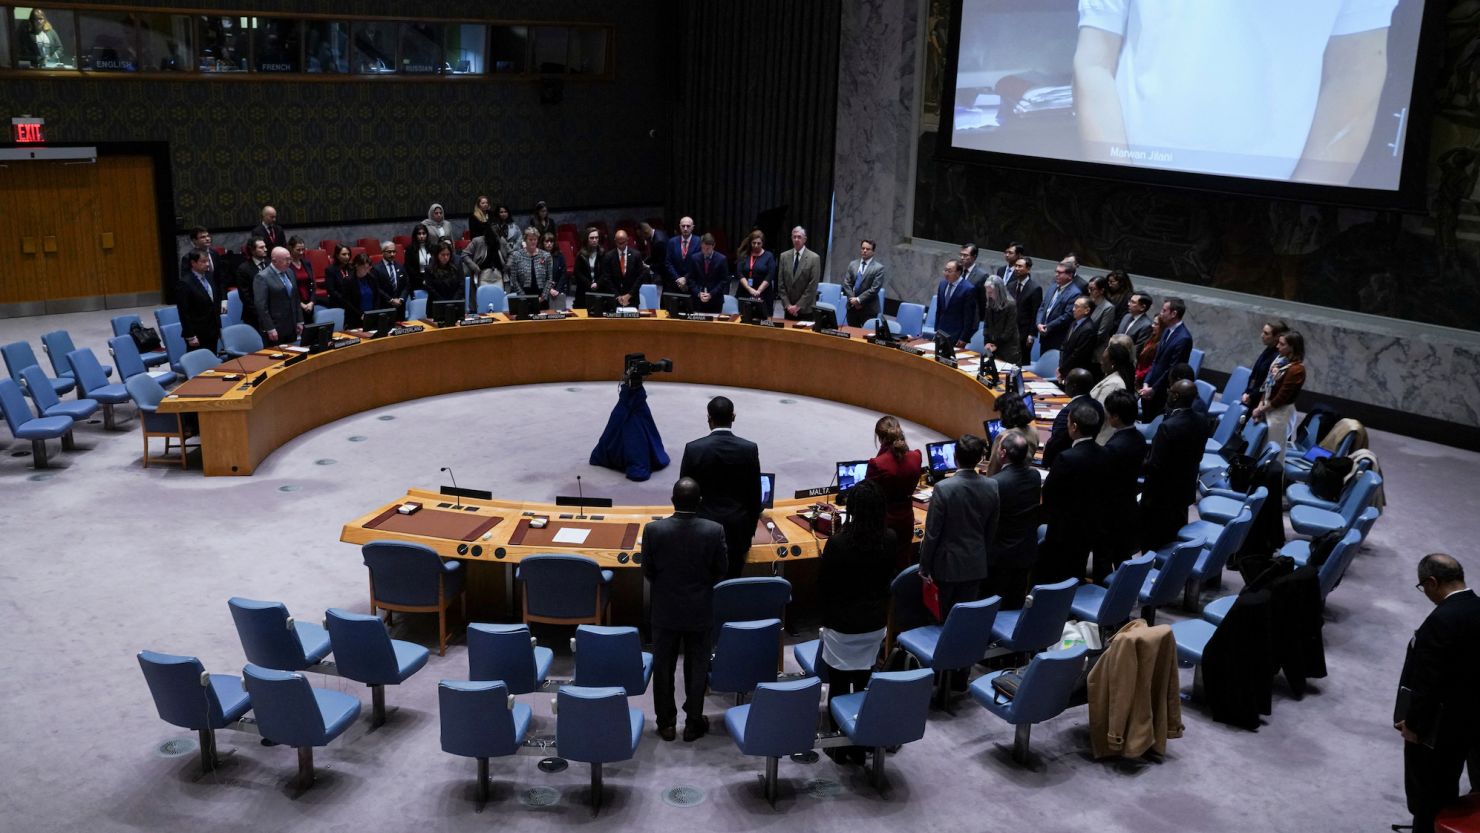 Delegates observe a minute of silence for the victims of the October 7 attack on Israel by Palestinian Islamist group Hamas and for Palestinians who have died in the conflict between Israel and Hamas, during a meeting of the United Nations Security Council in New York on November 10.